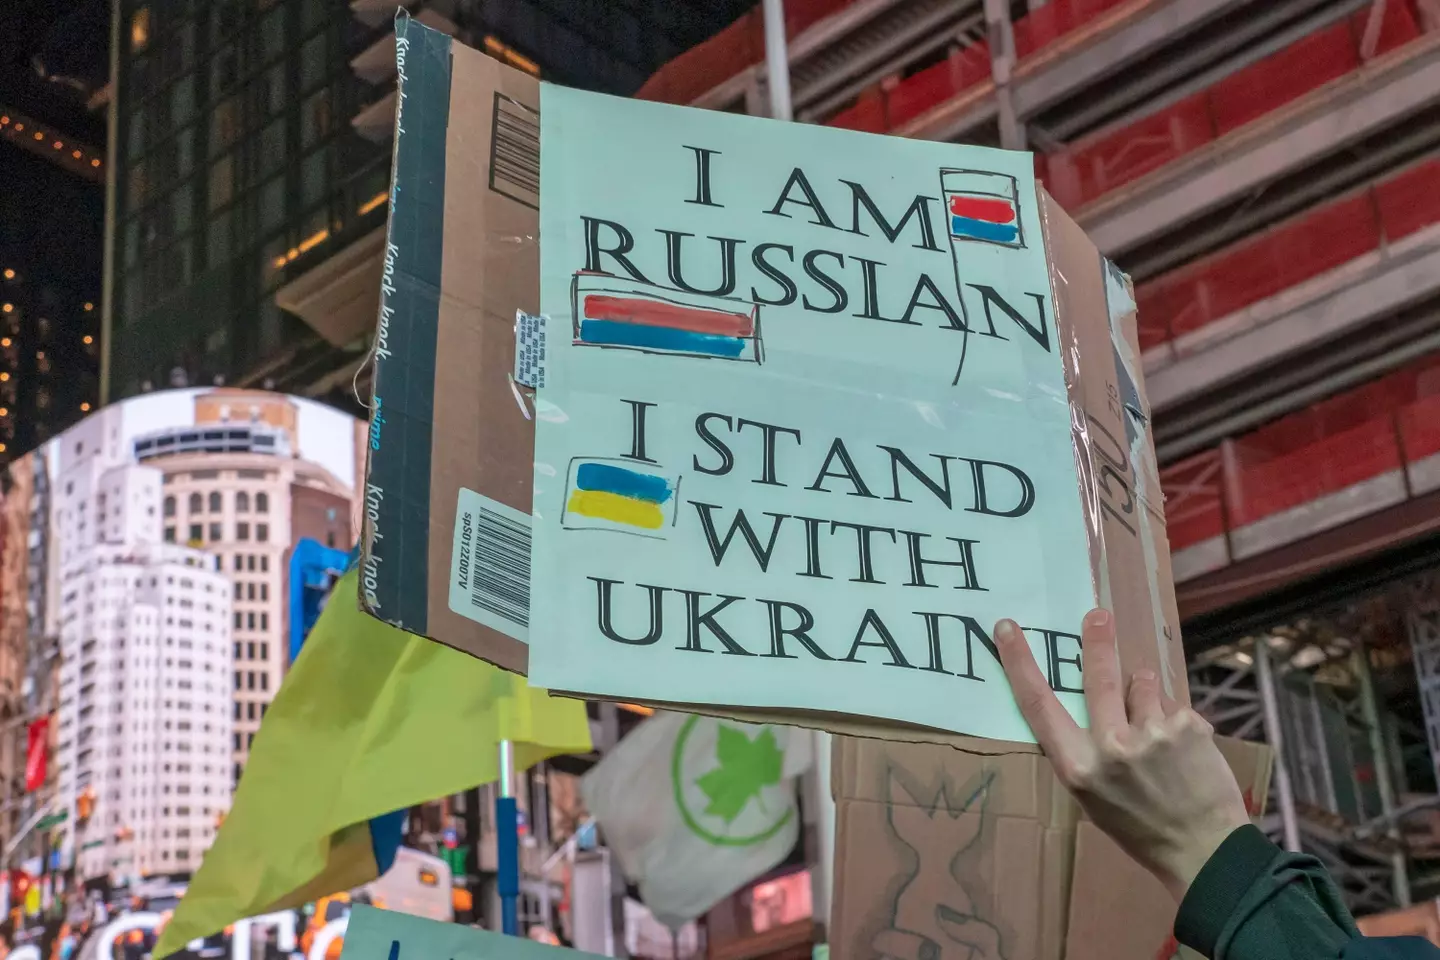 Russians have protested against Putin's war in Ukraine (Alamy)